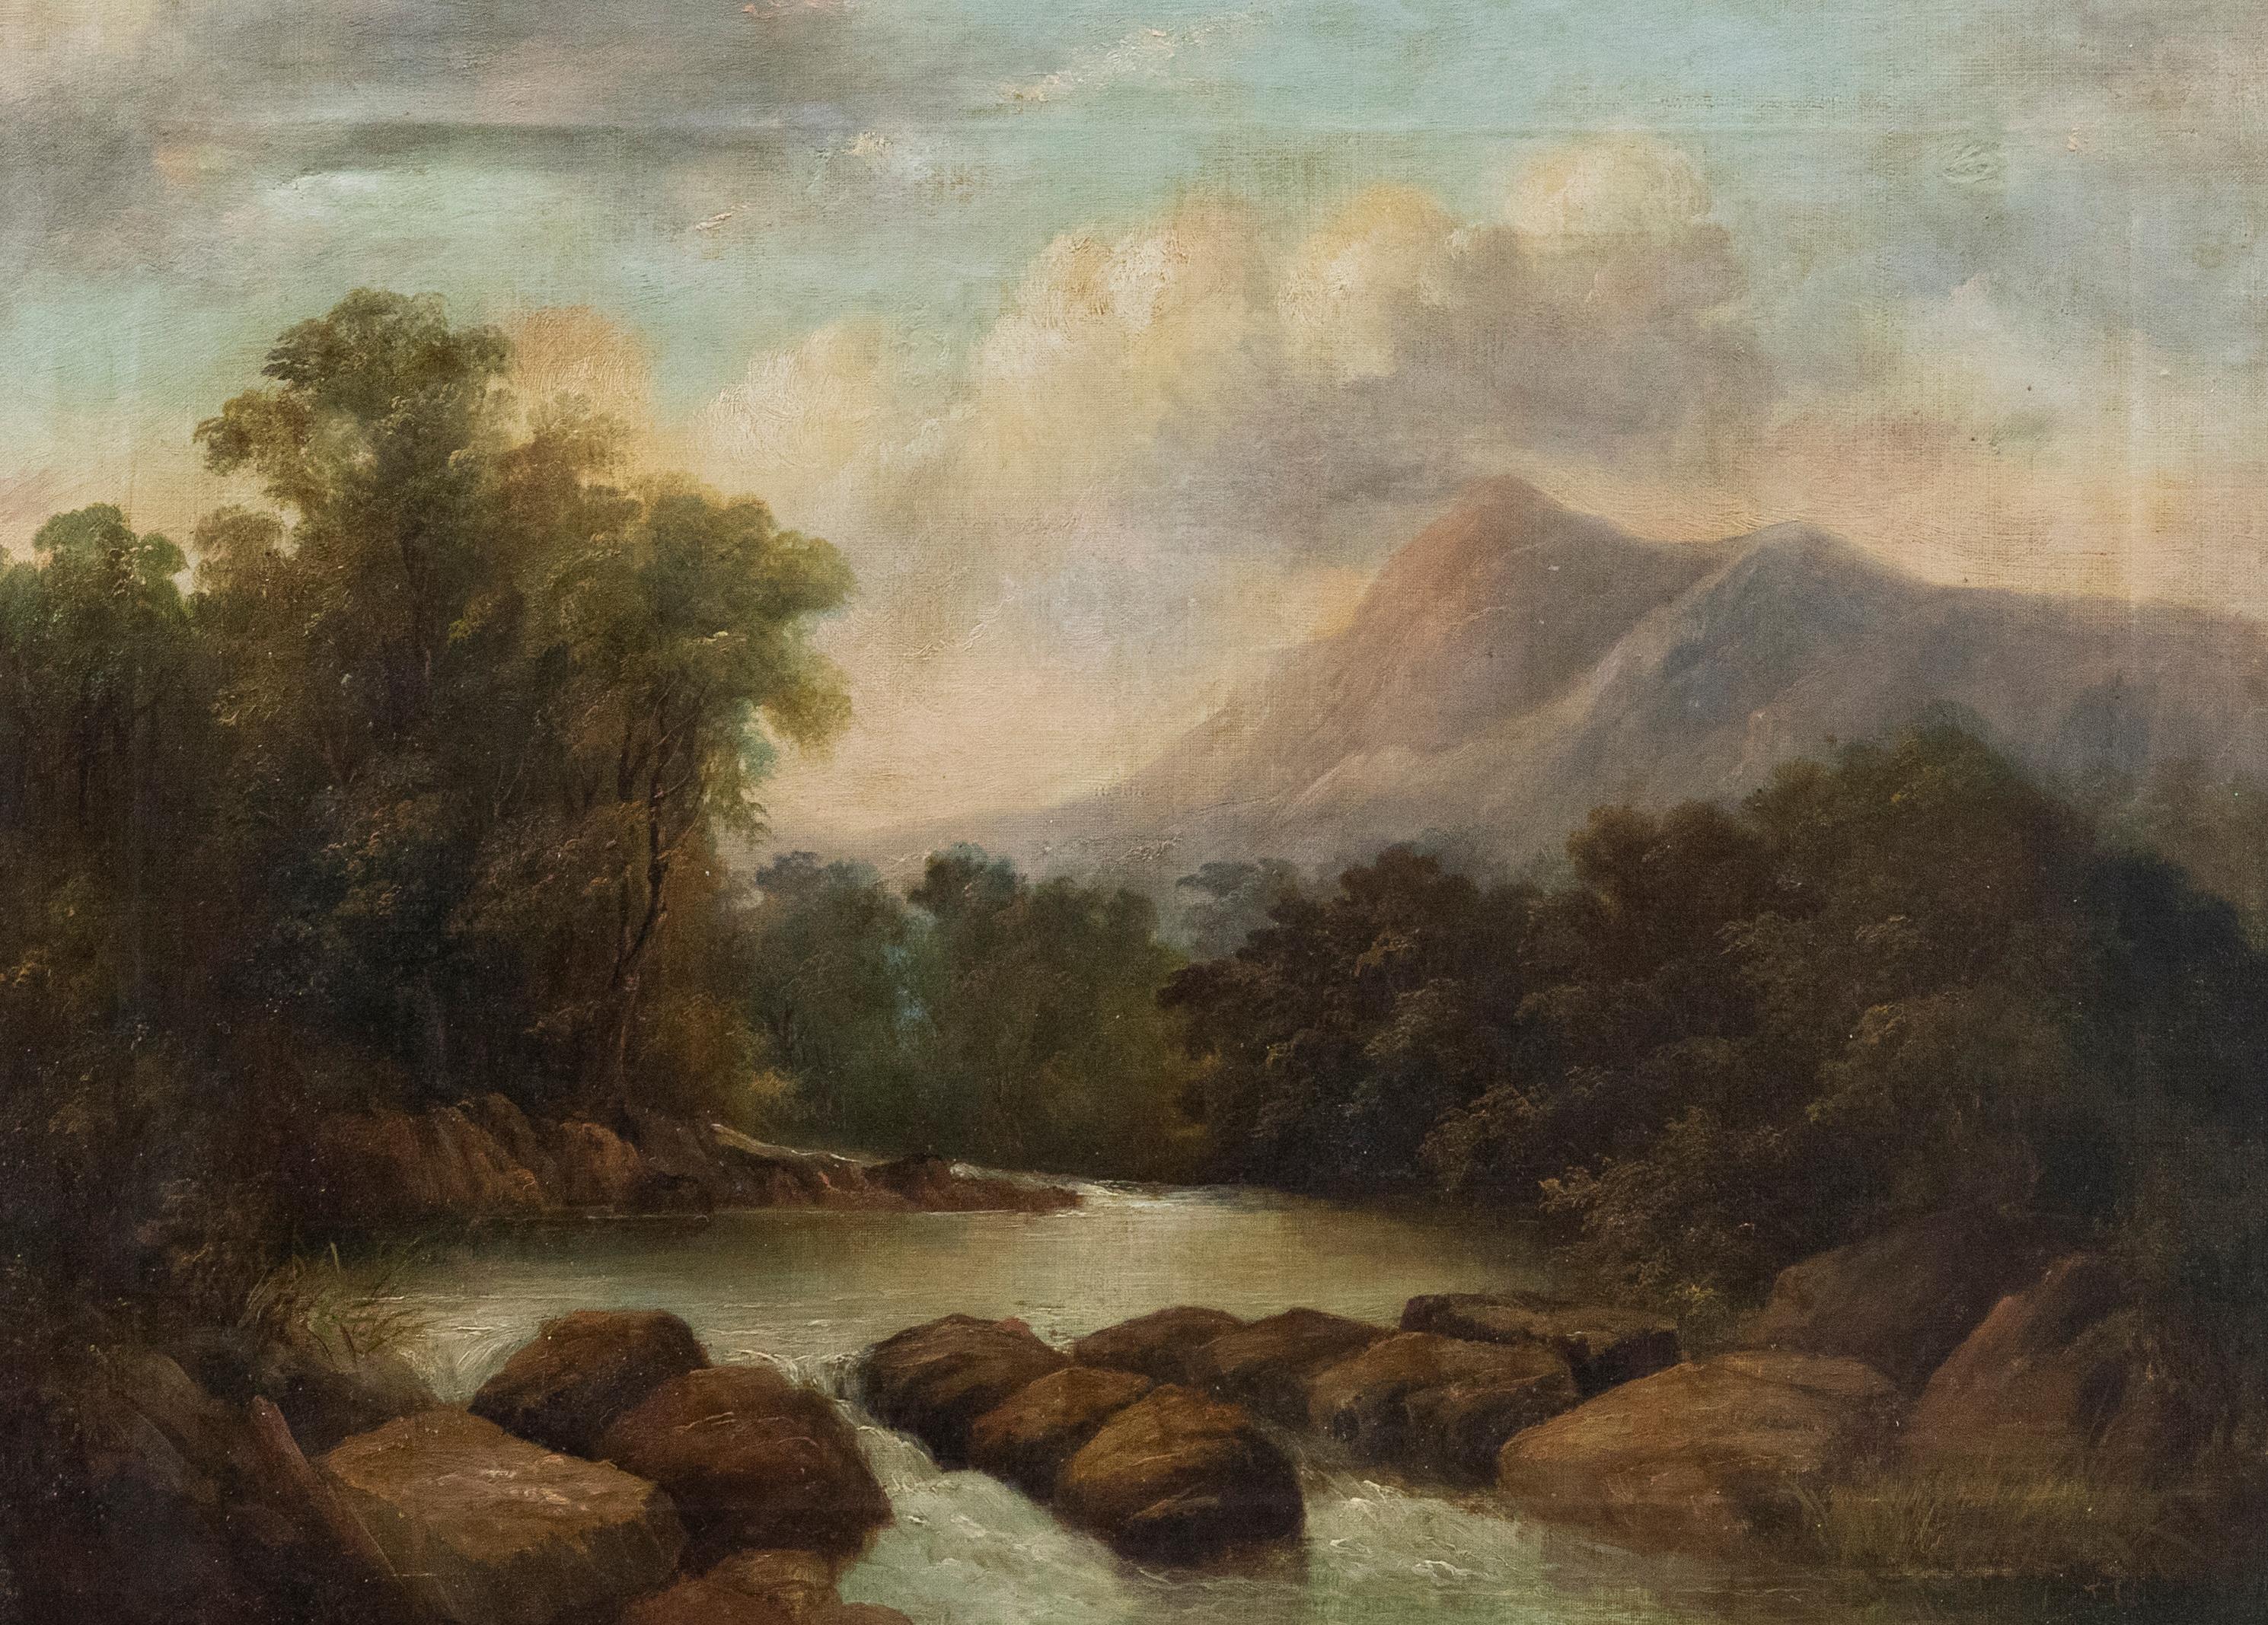 Unknown Landscape Painting - 19th Century Oil - The Lledr Valley